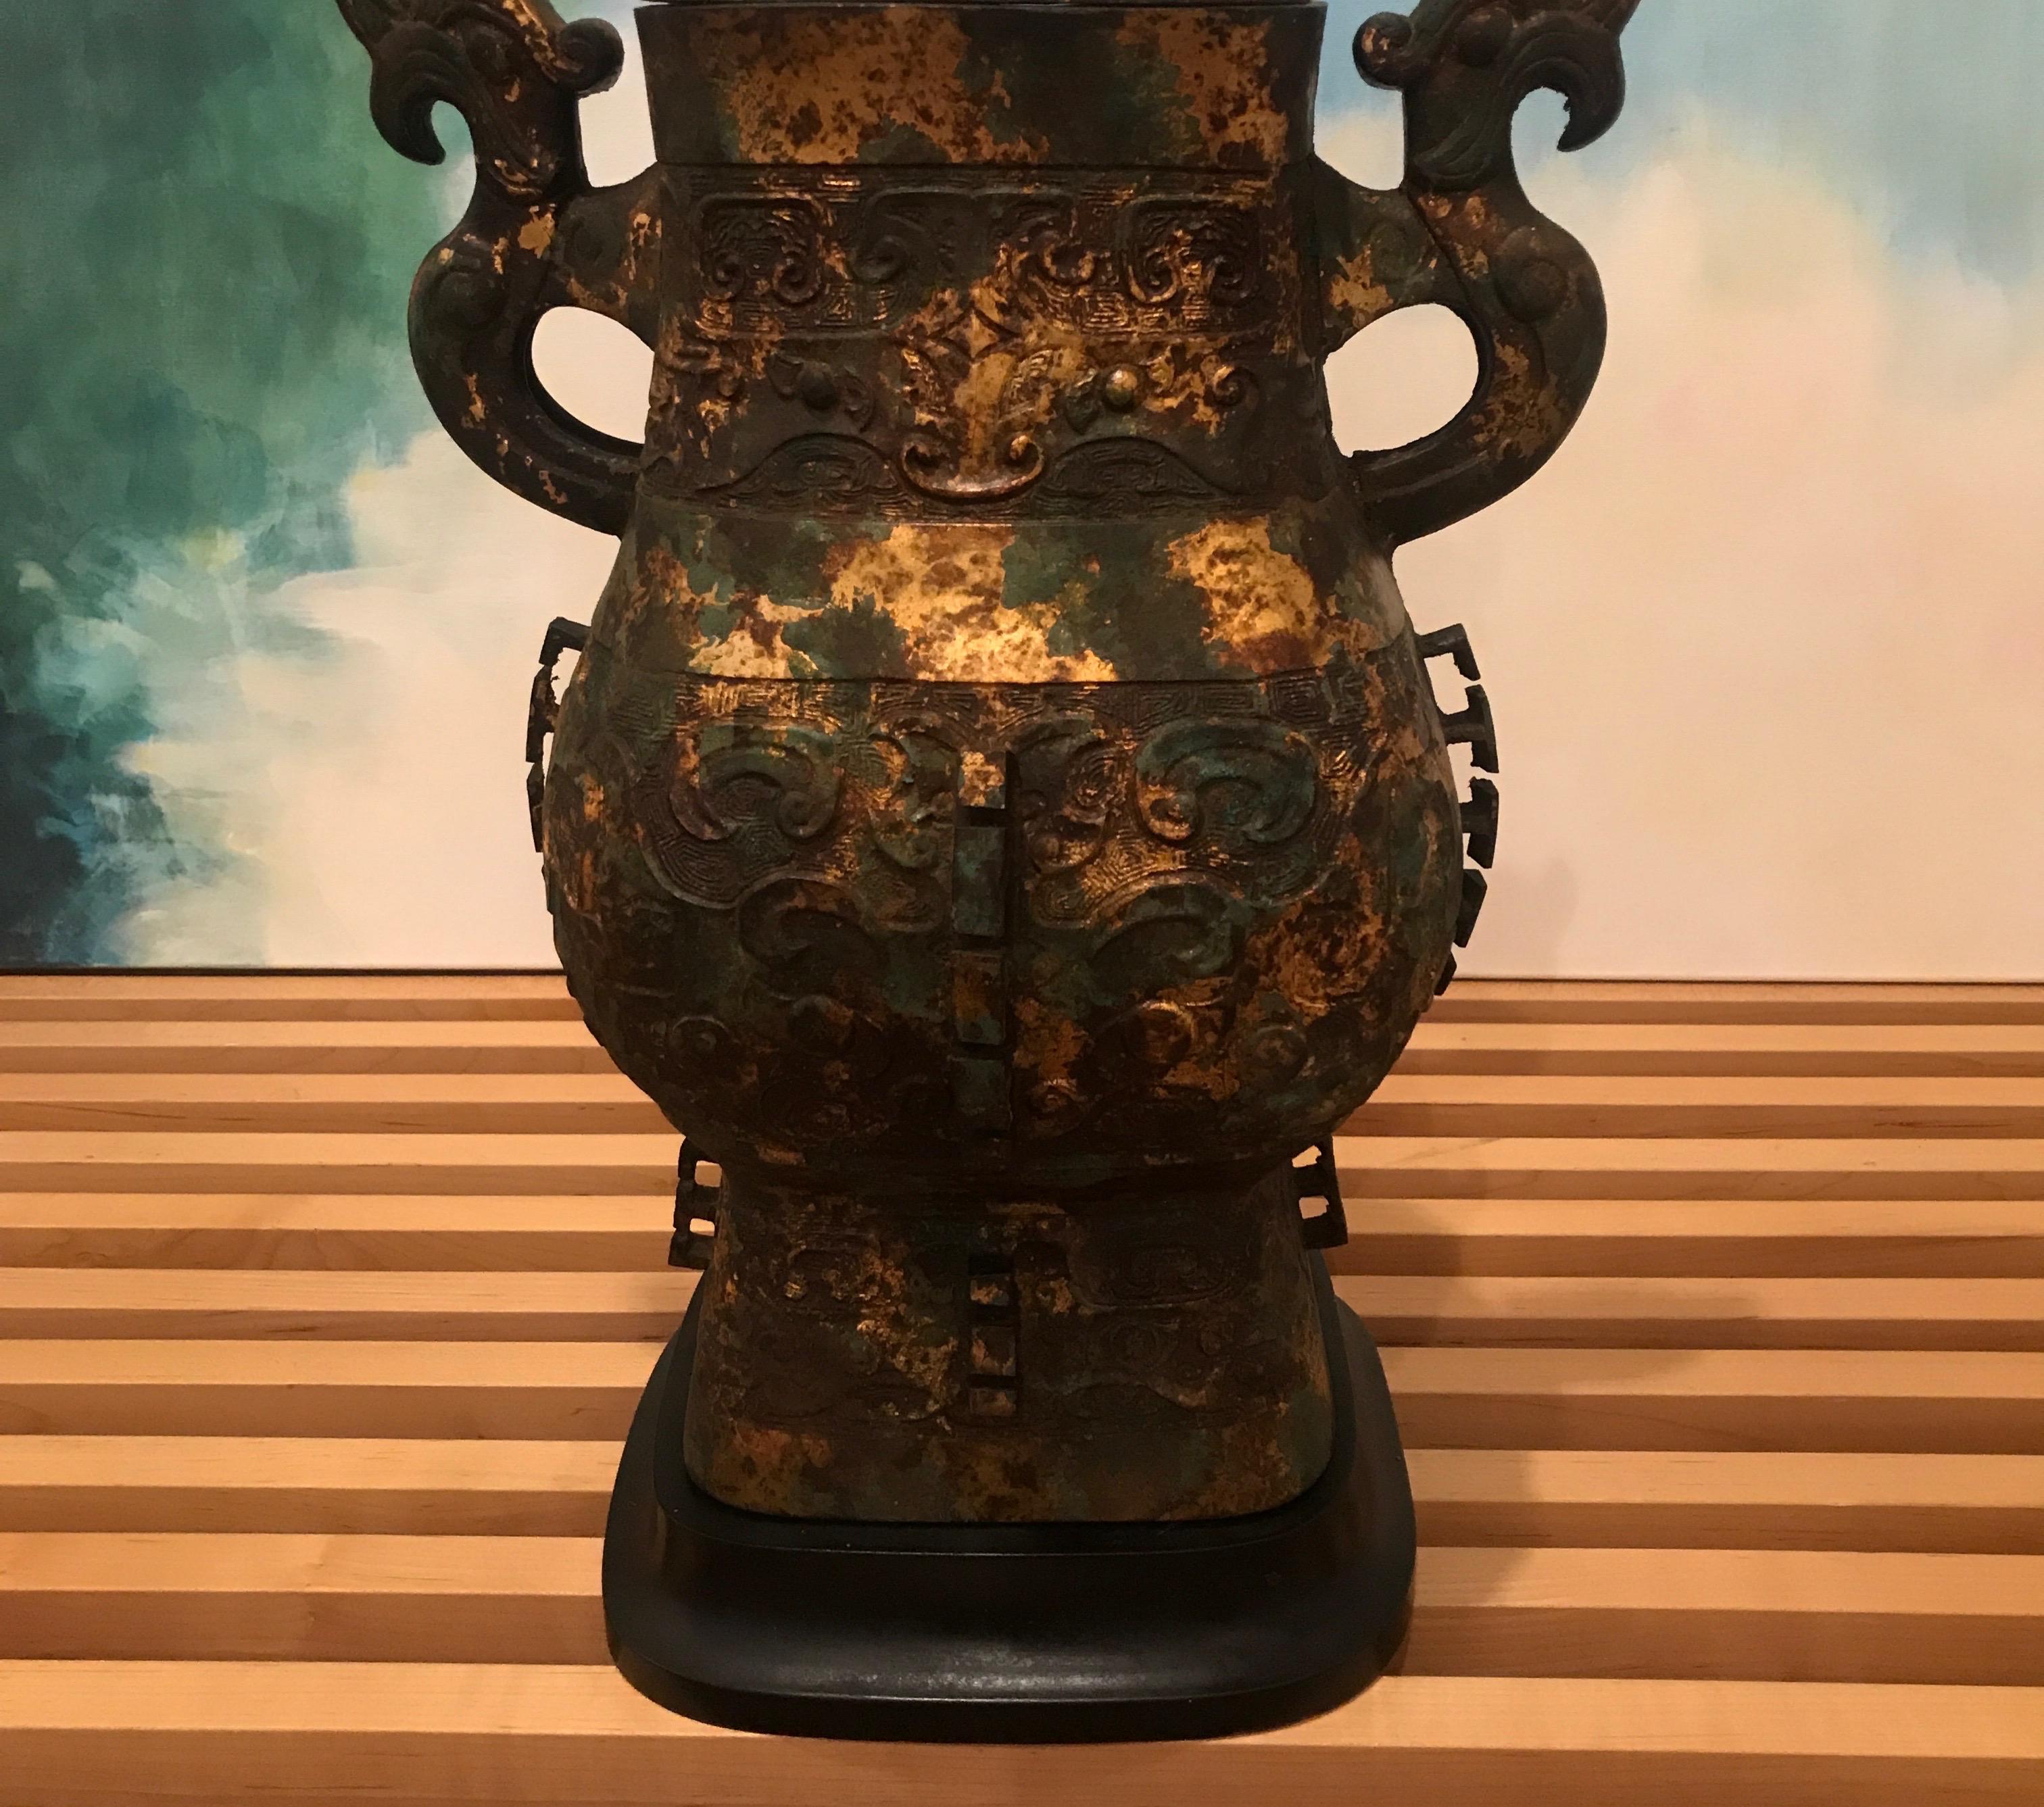 An antique Chinese Archaistic Hu form style bronze urn now as a lamp. The fine heavily detailed surface with an aged gilt and Verdi green finish, the original from an ancient form, this version being from the early 20th century. The vase is 15.5